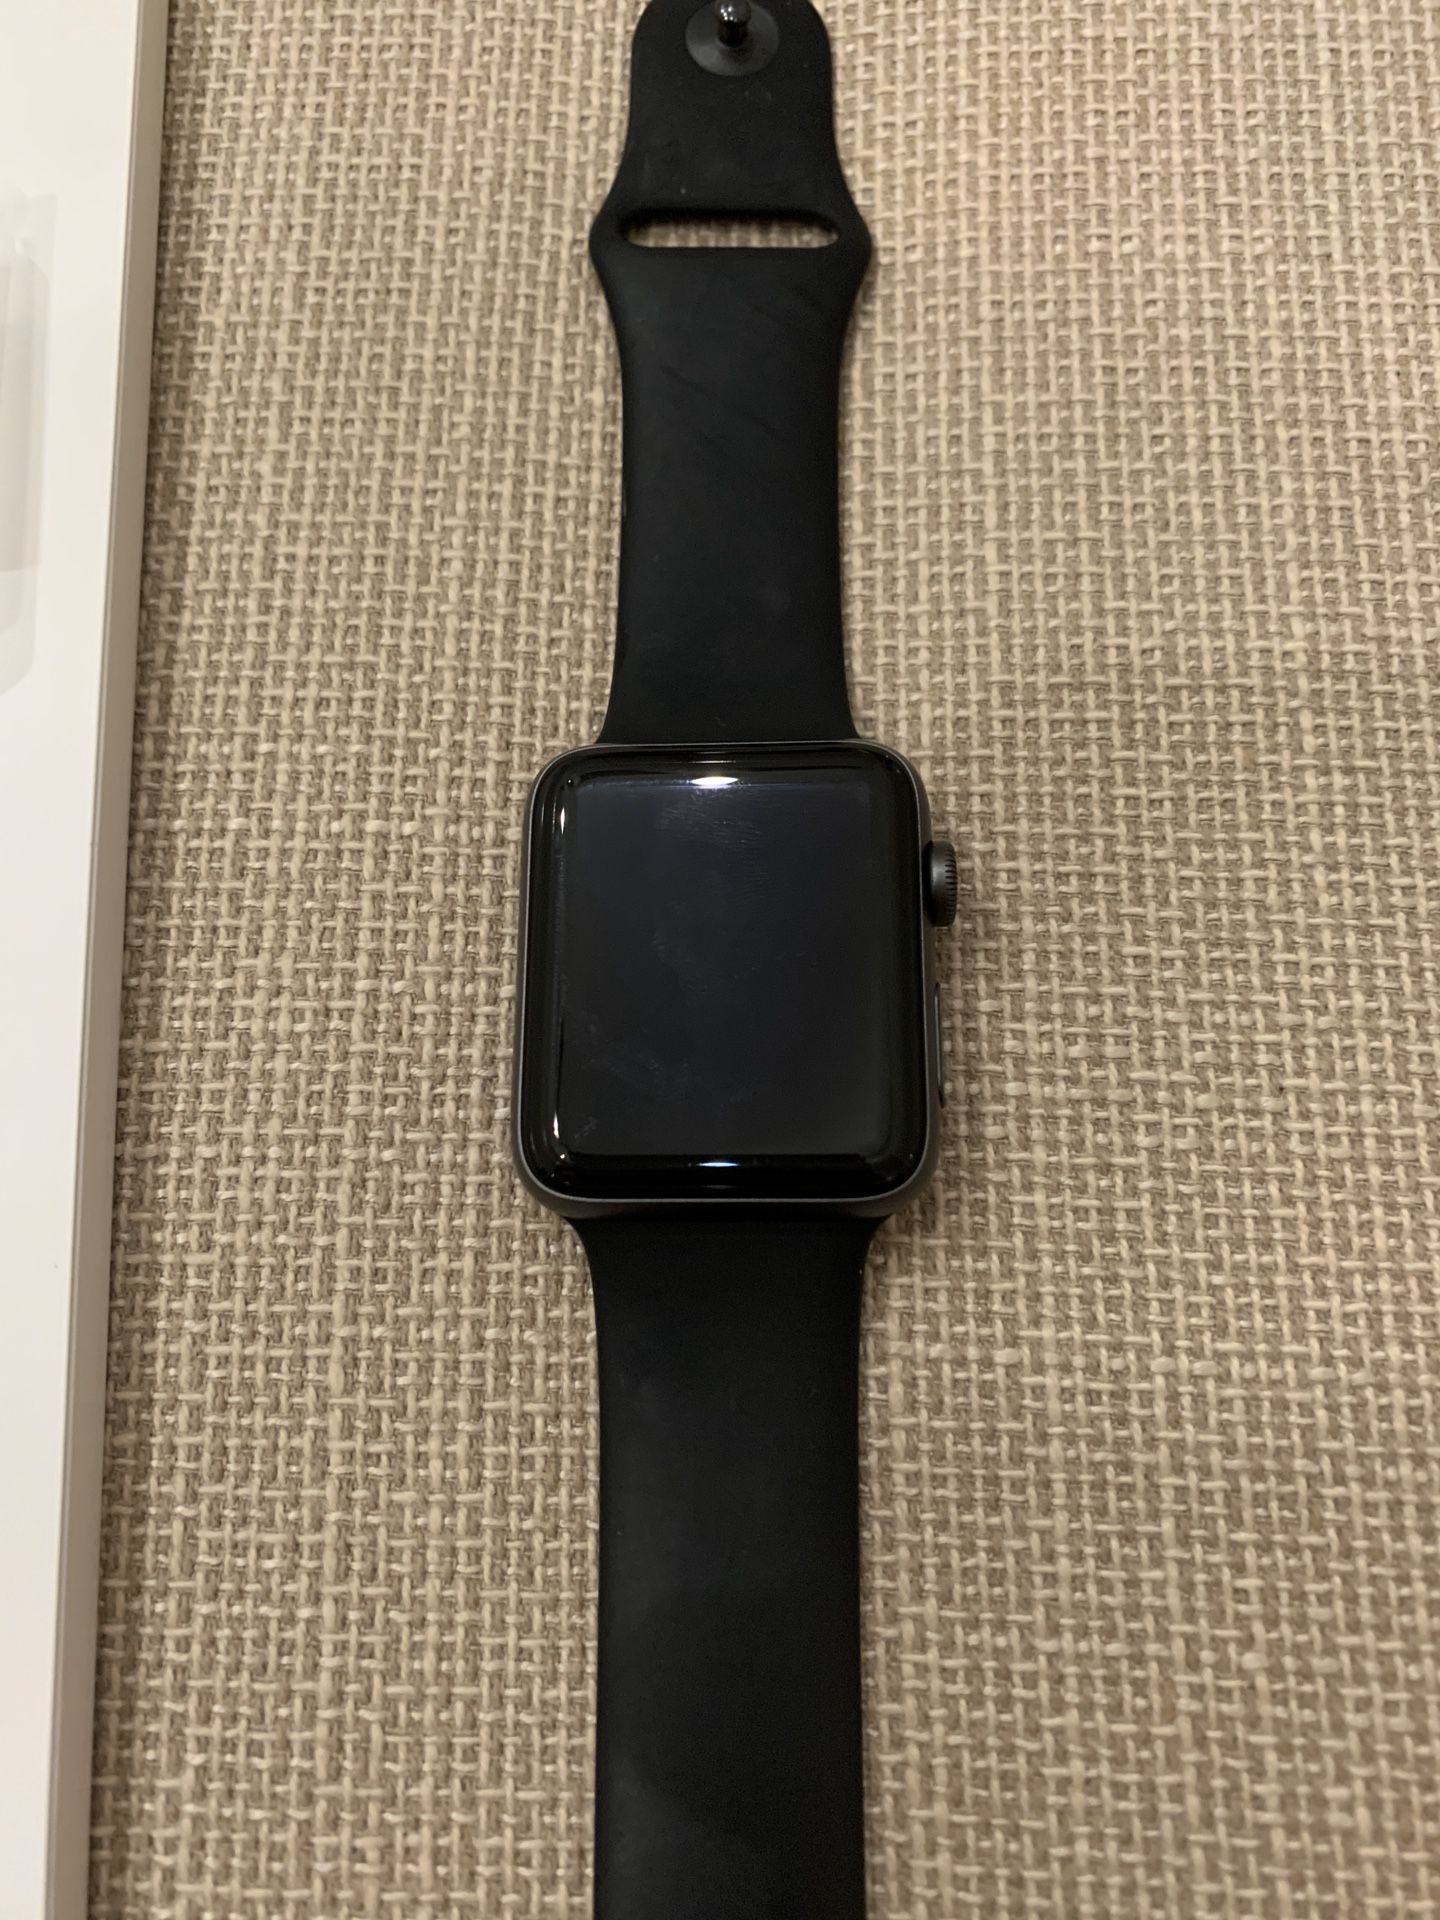 Apple Watch Series 2 42mm Aluminum Case Space Grey GPS with Black Sport Strap